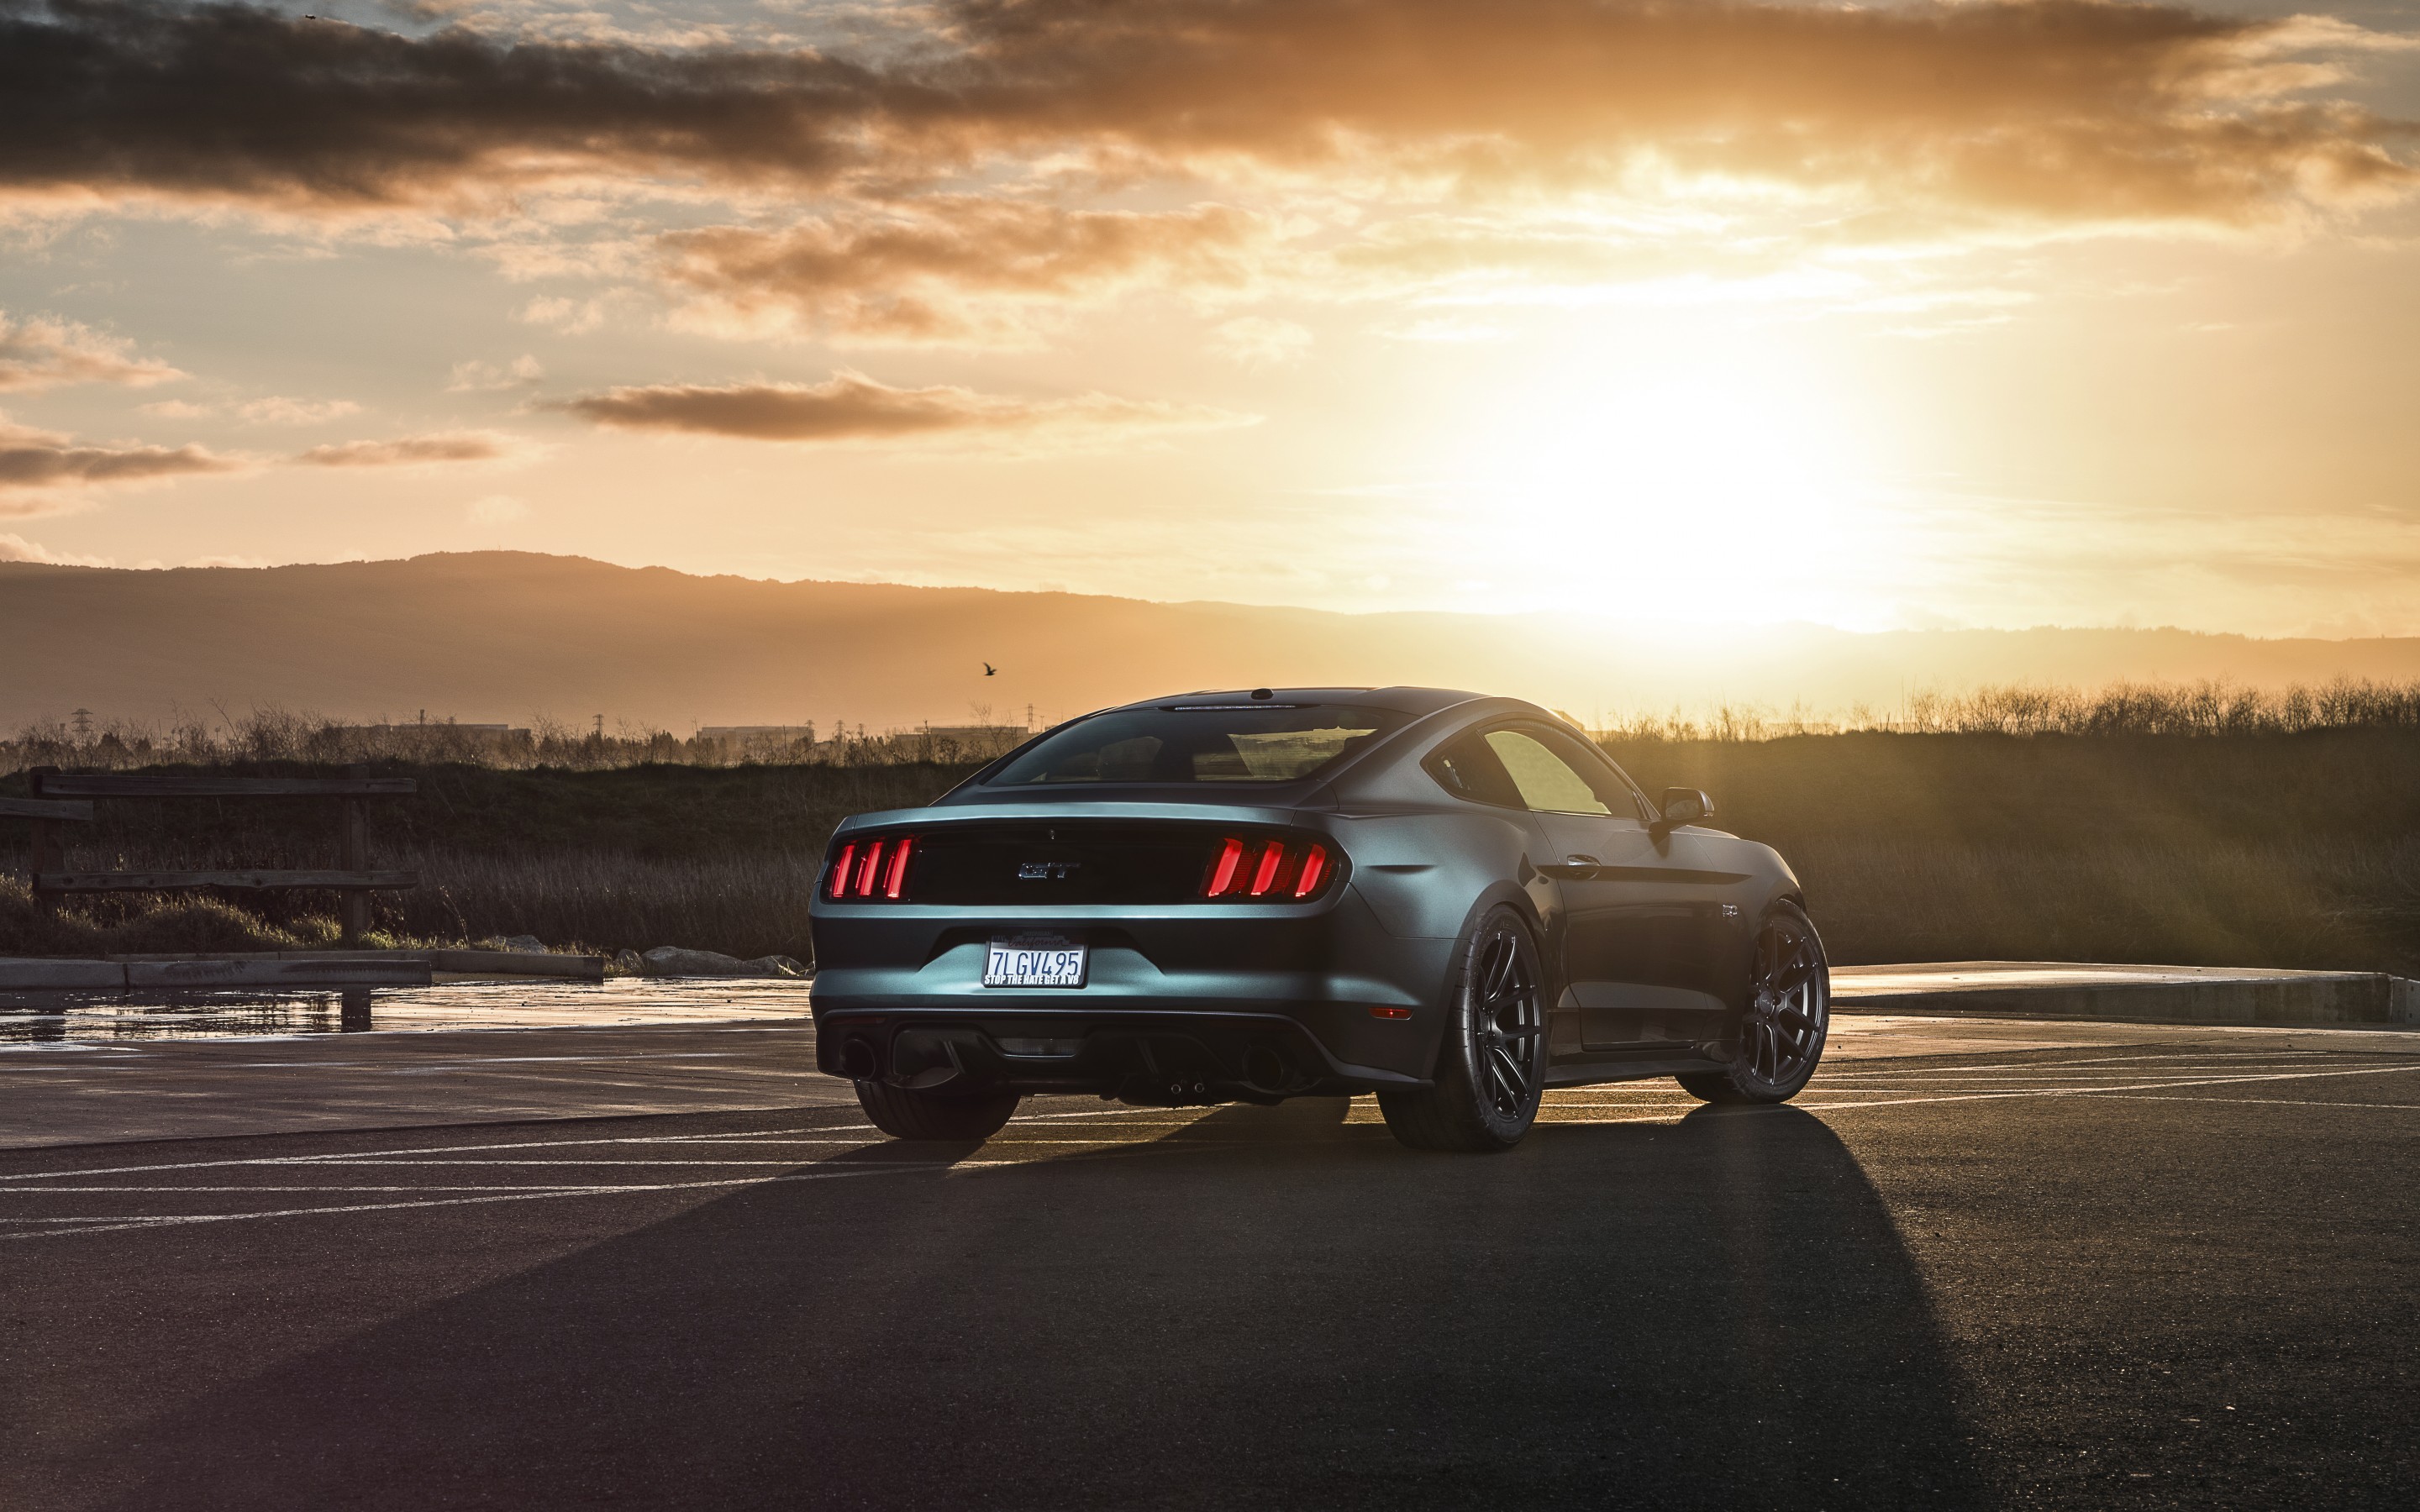 Ford Mustang 2015 Gt Wallpaper Hd Cars 4k Wallpapers Images Photos And Background Wallpapers Den